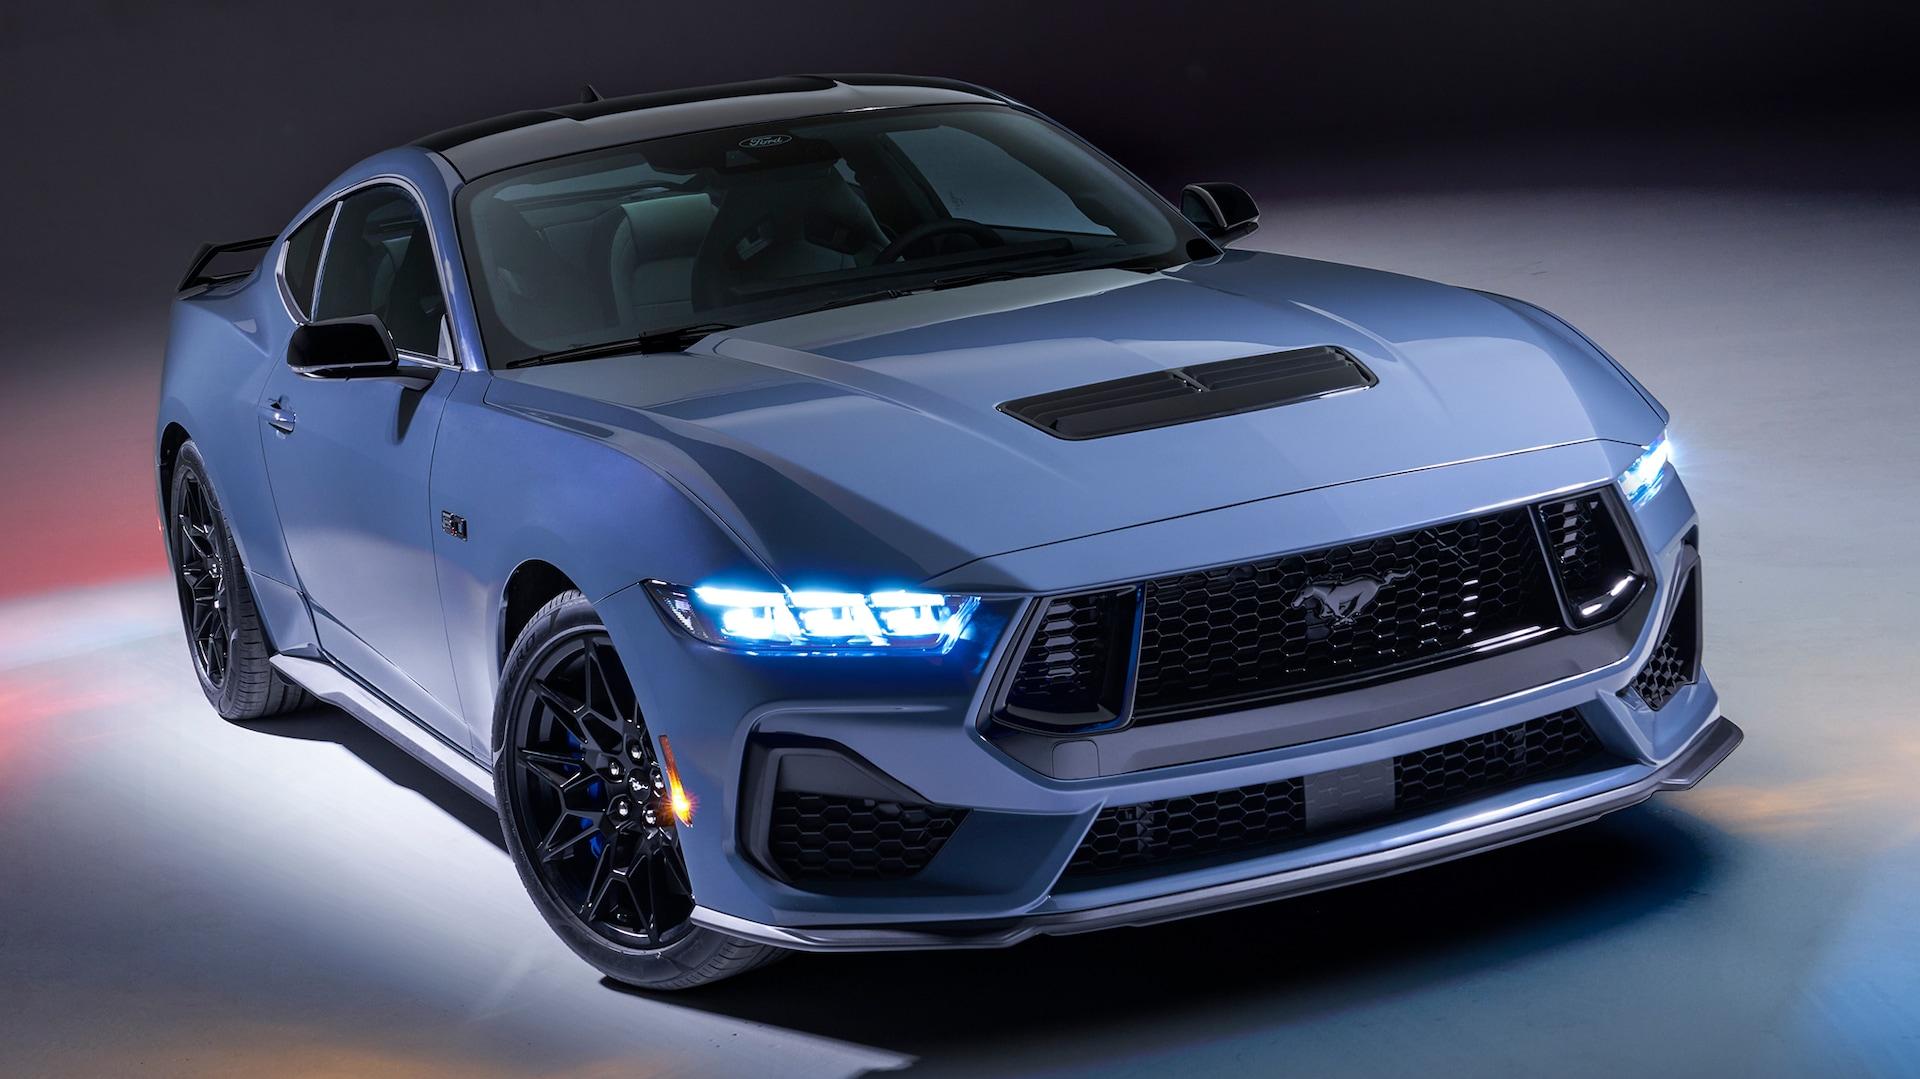 Ford Mustang First Look Photos And Full Details On The New